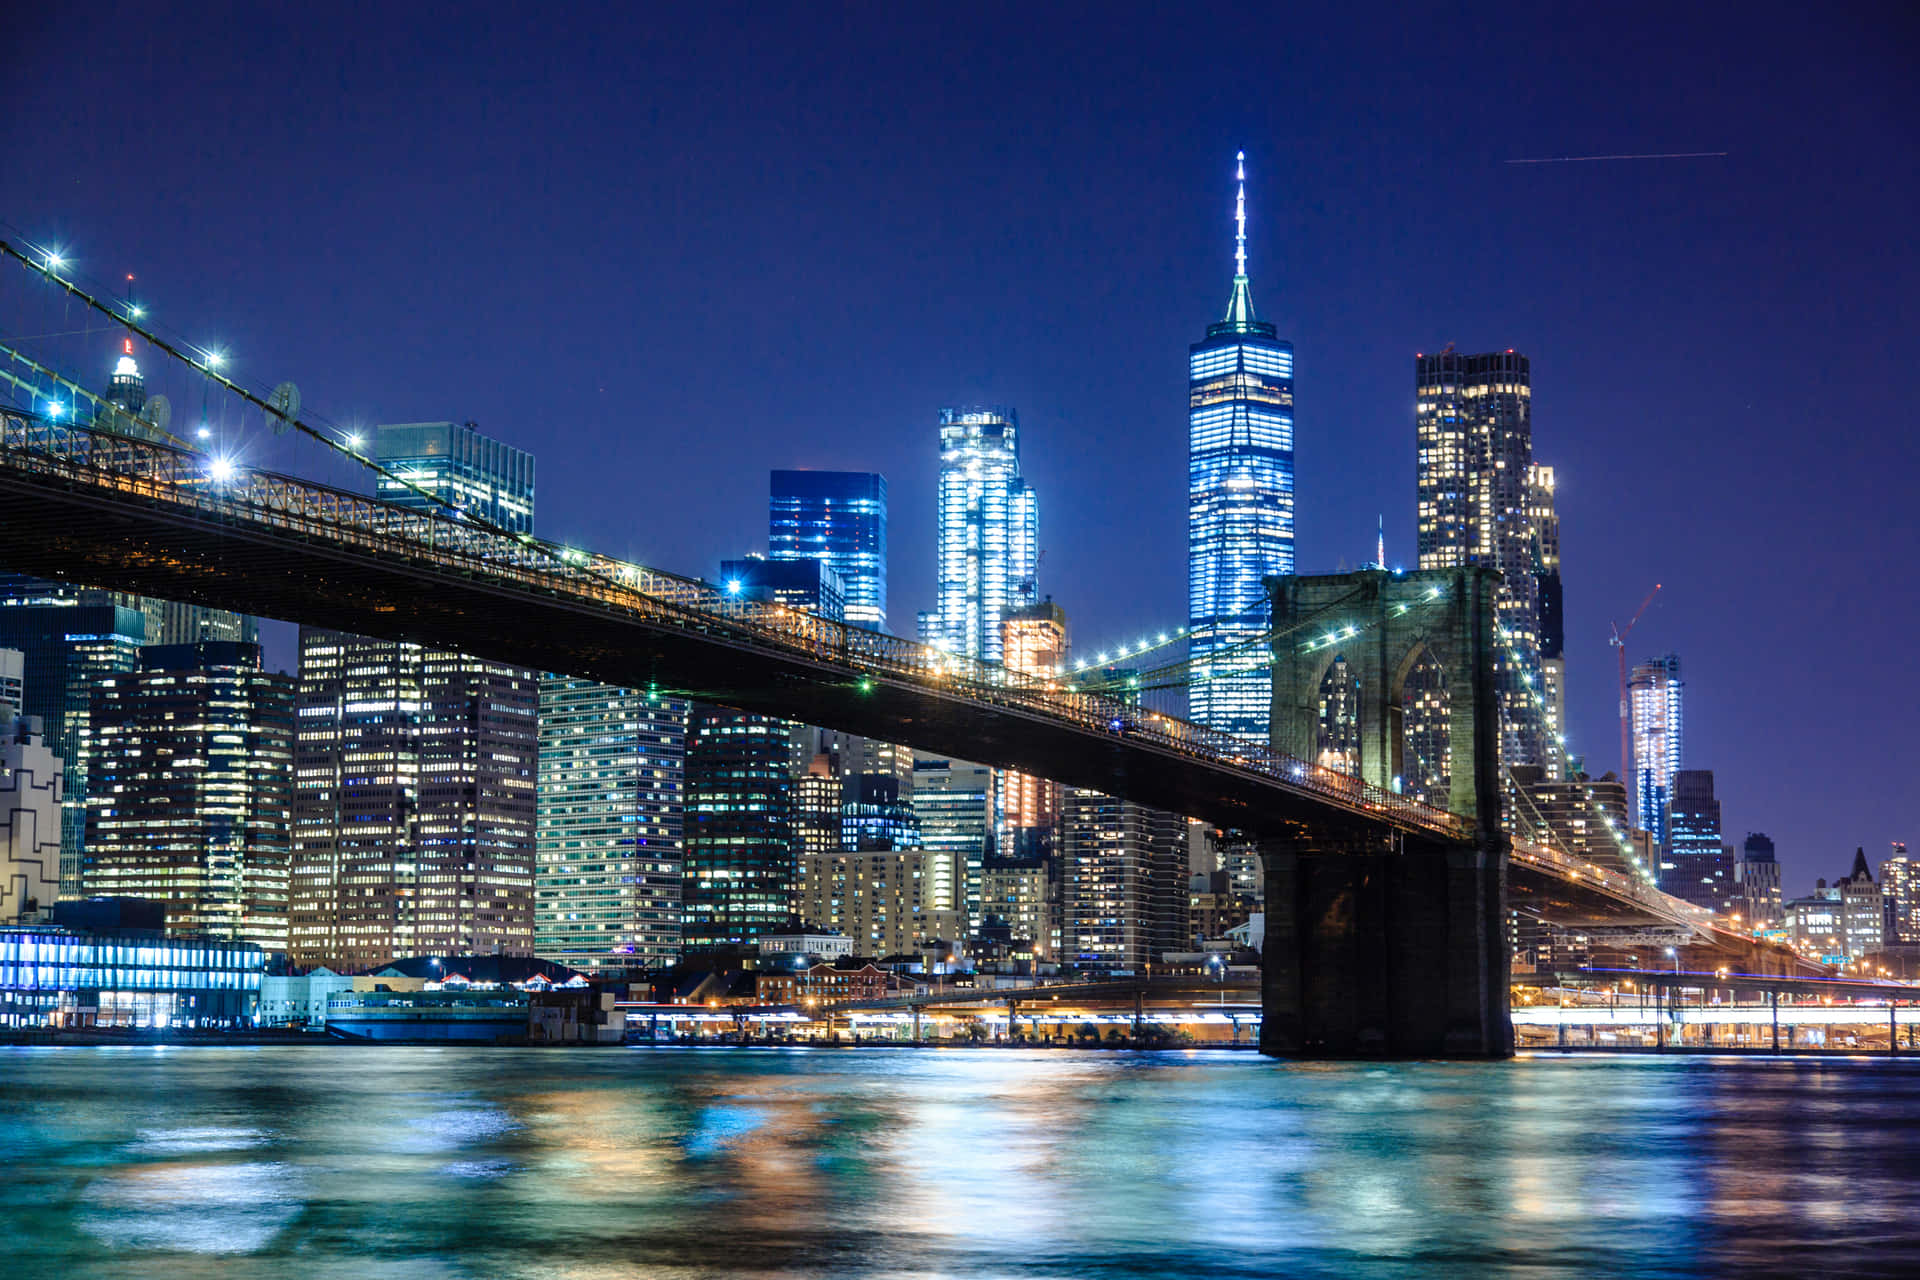 “Dramatic Skyline of the Iconic New York City” Wallpaper